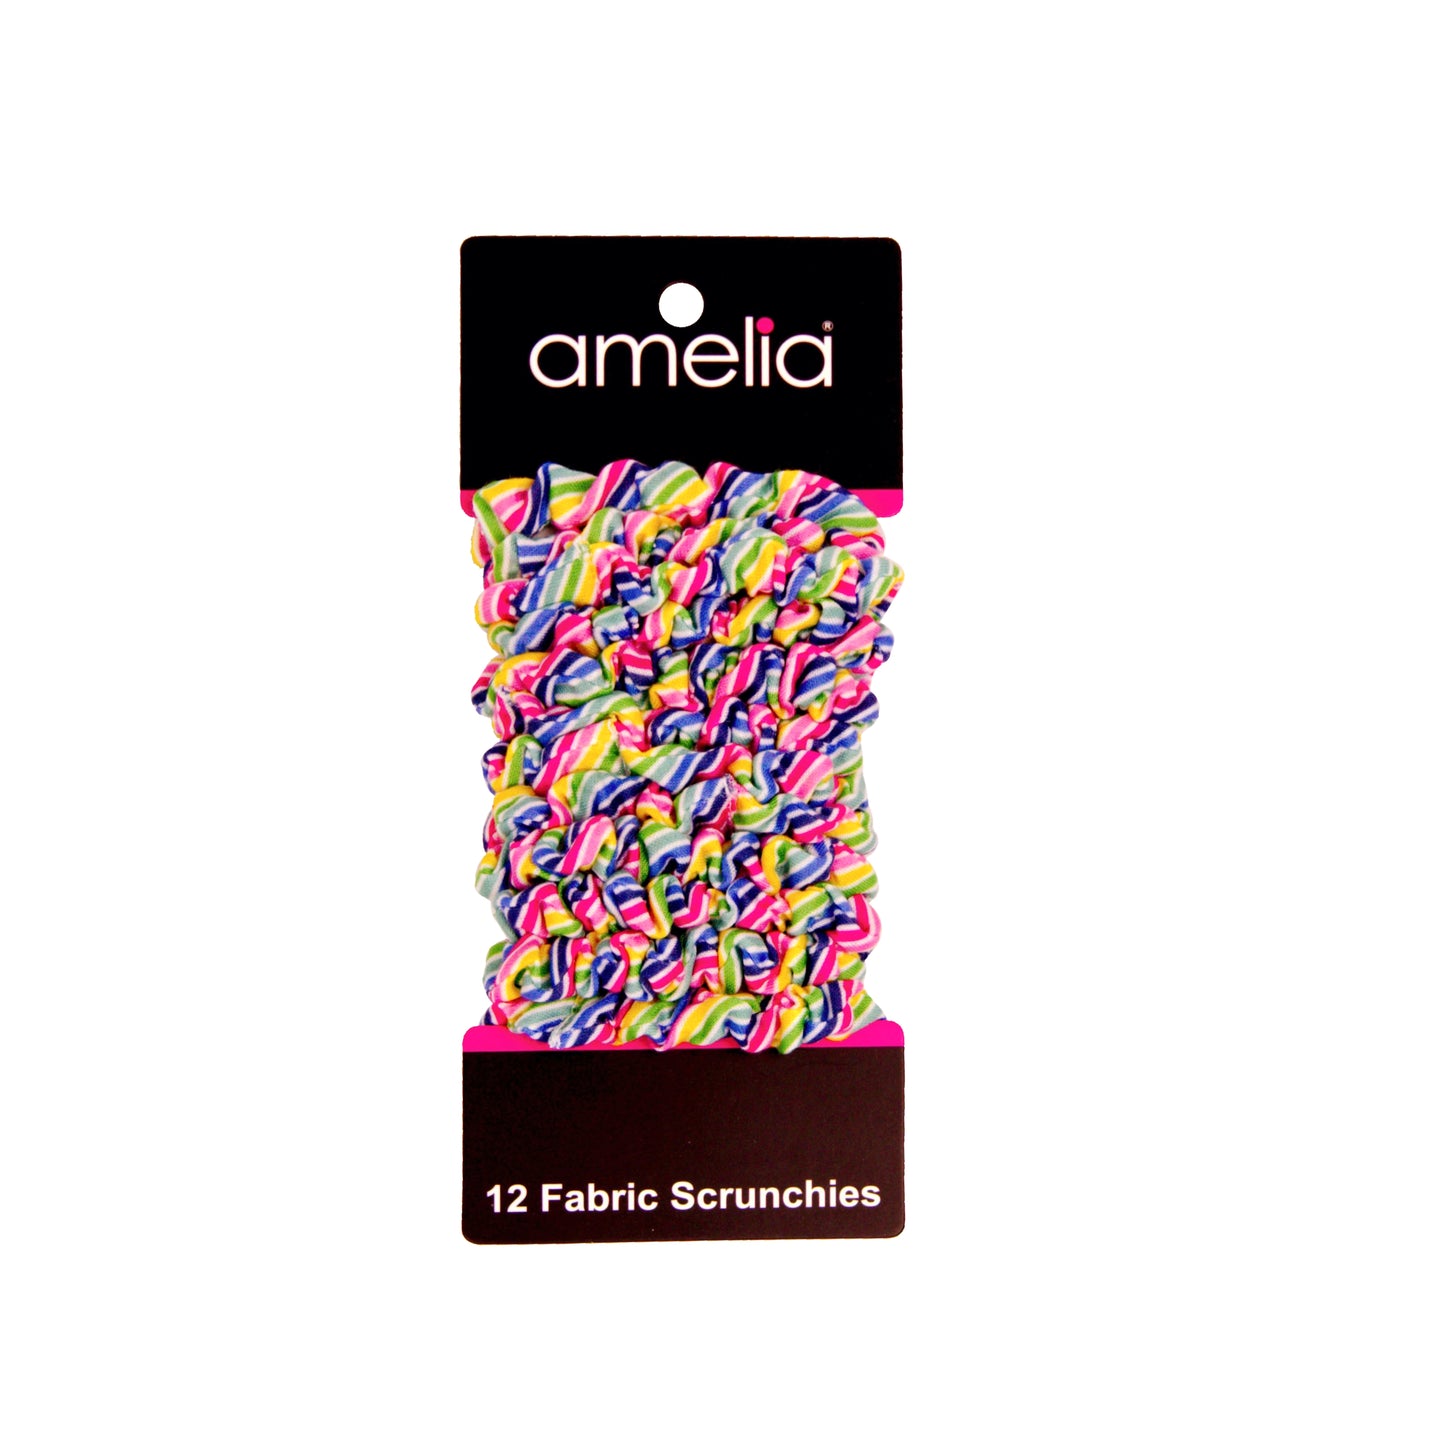 Amelia Beauty, Rainbow Stripe Jersey Scrunchies, 2.25in Diameter, Gentle on Hair, Strong Hold, No Snag, No Dents or Creases. 12 Pack